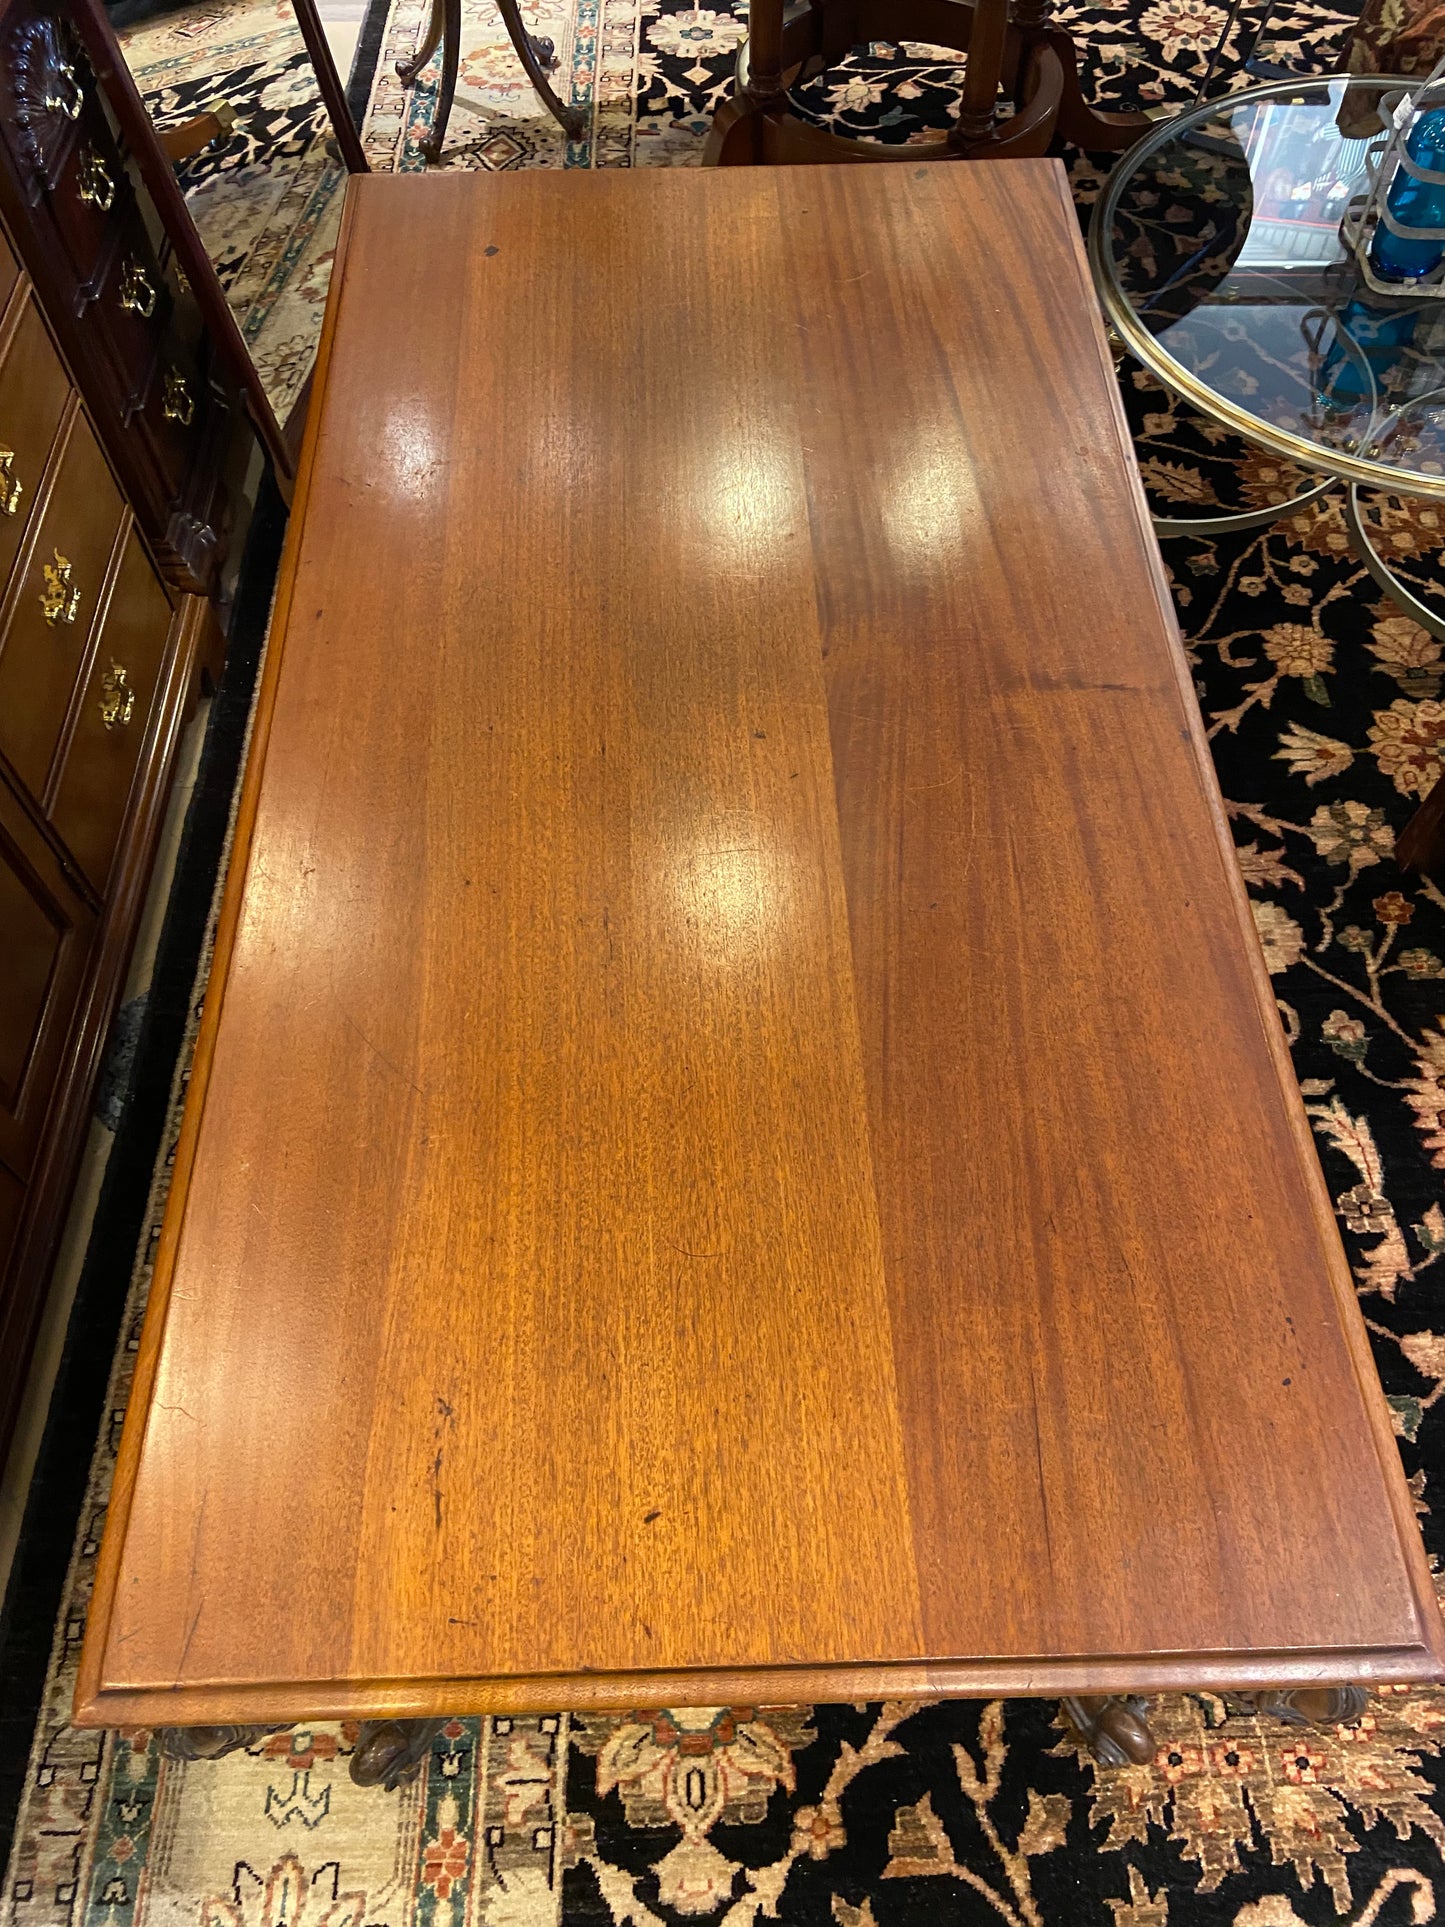 Antique Library Table (27382)